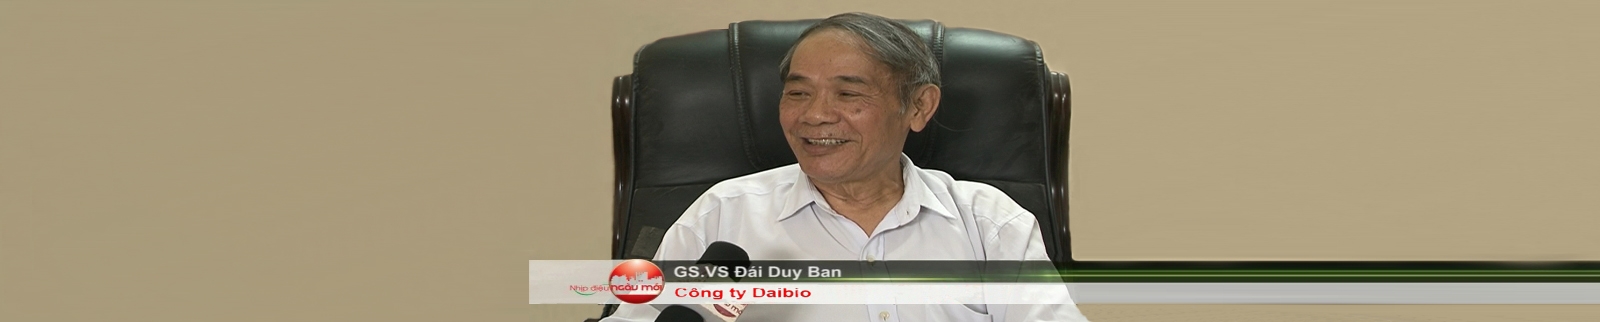 Hanoi TV showed Researches in DAIBIO